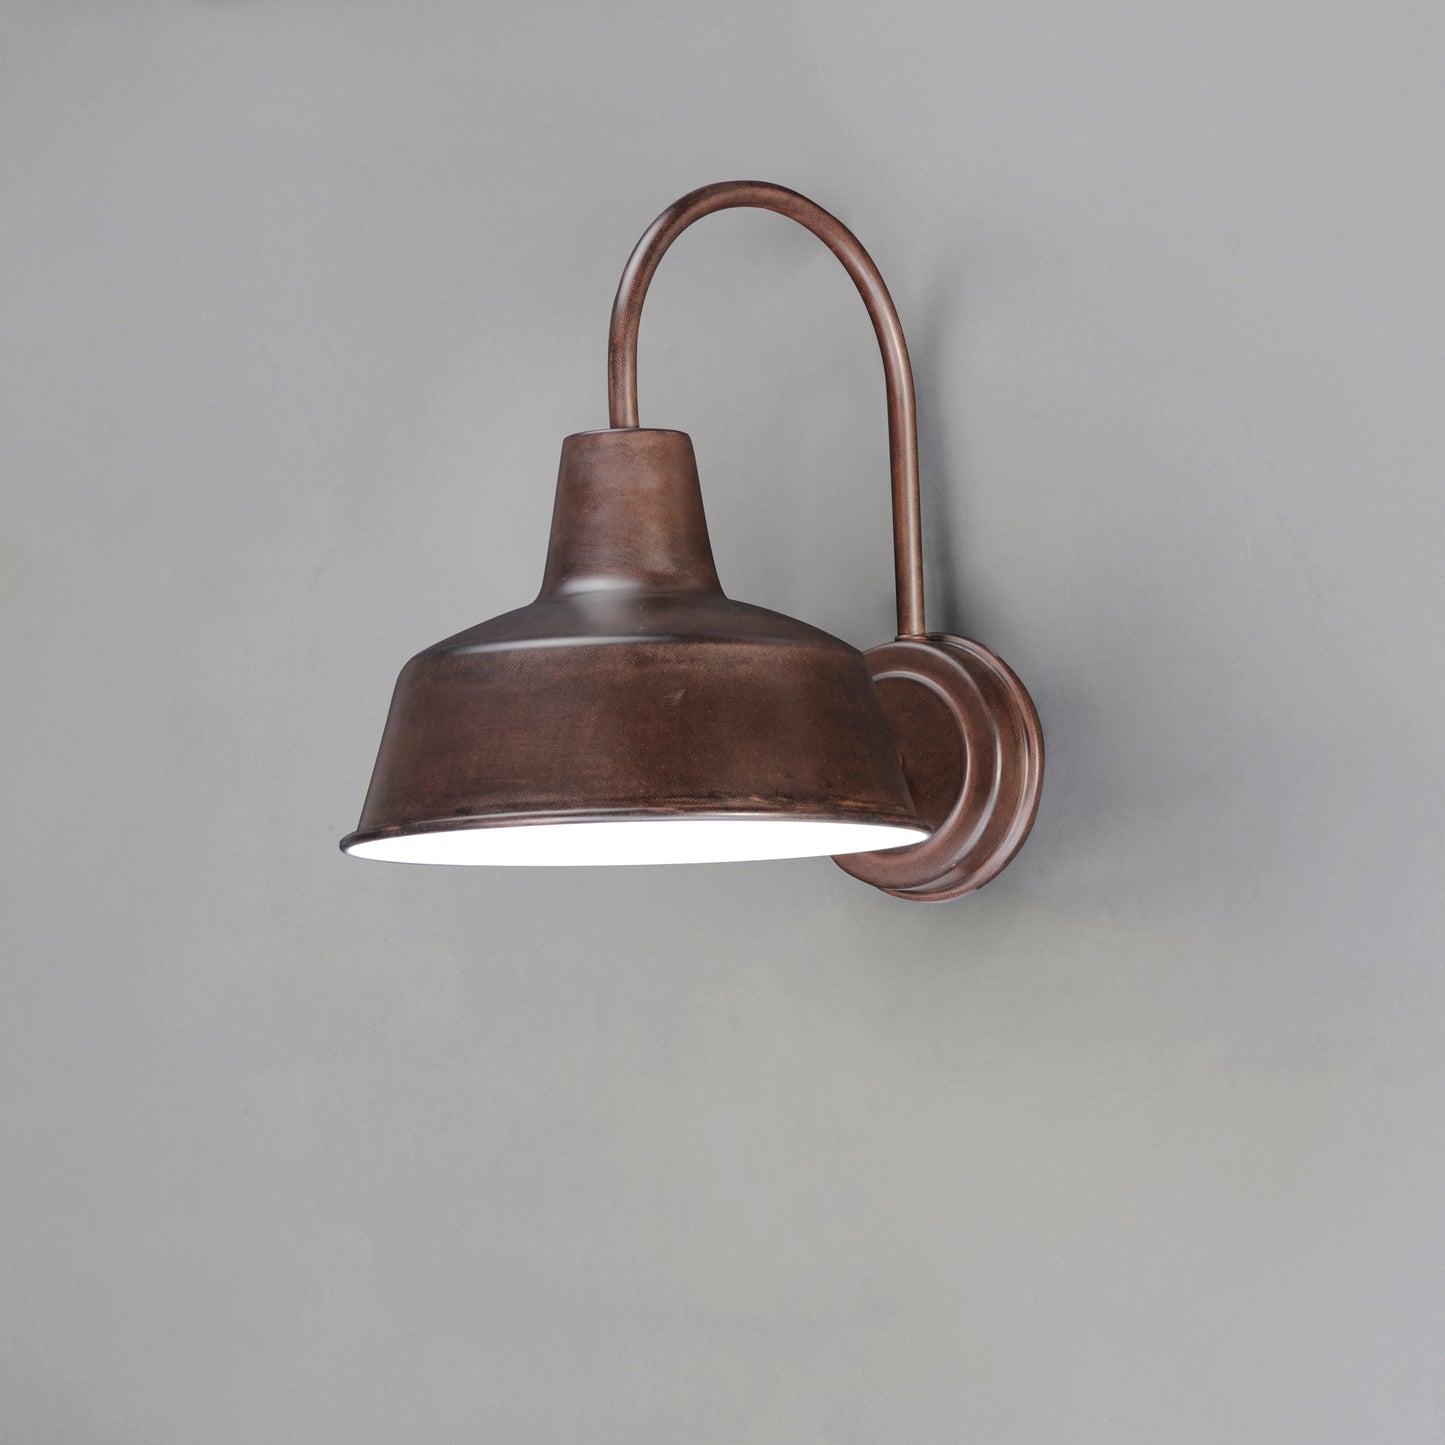 Maxim Pier M Outdoor Wall Sconce